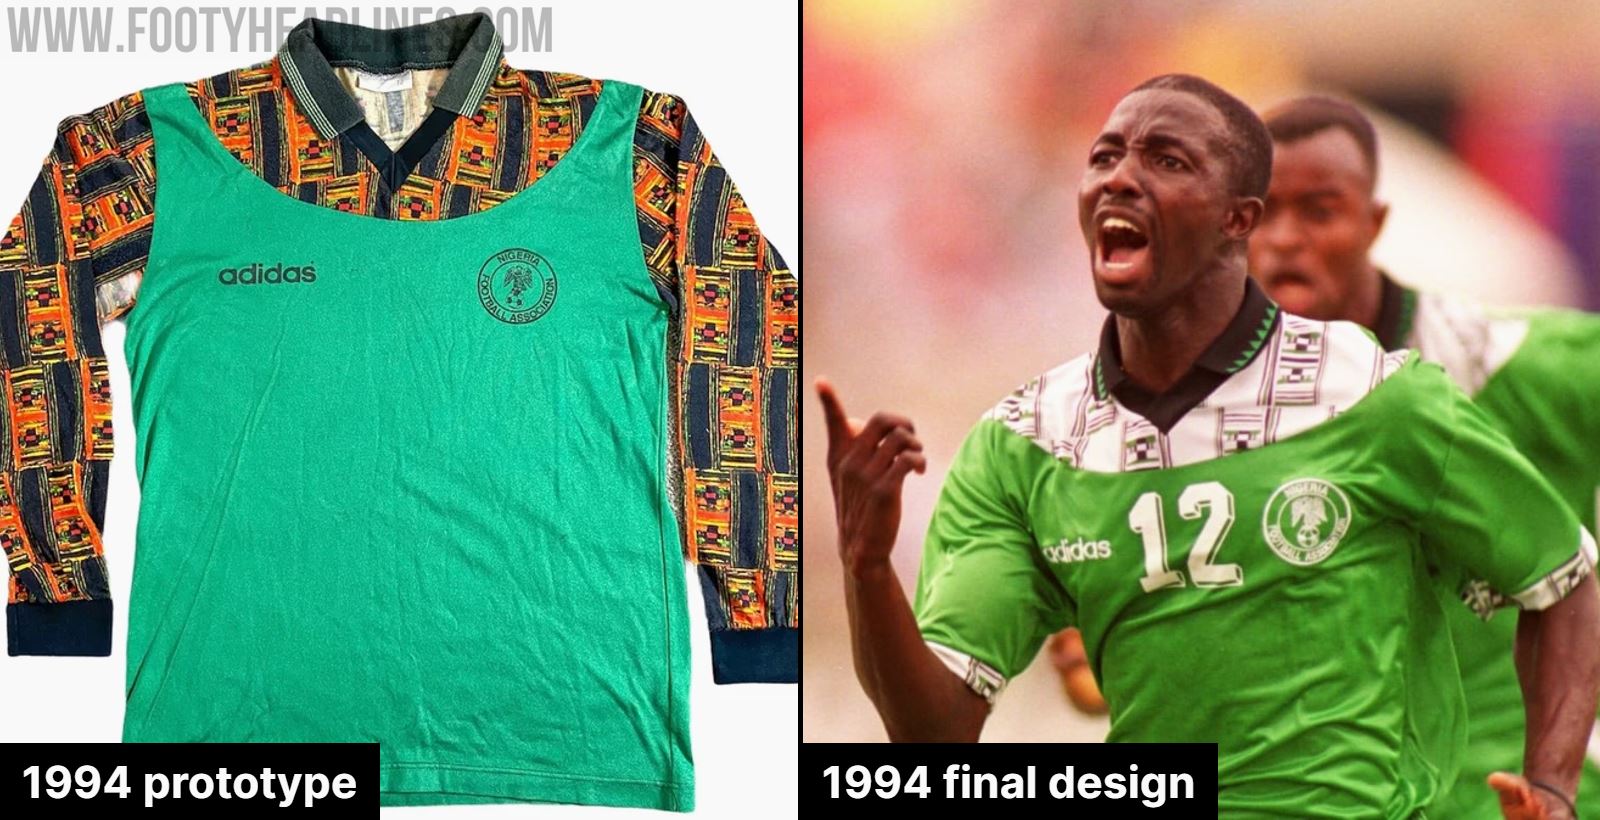 congelador Demon Play Observar The Shirt That Never Was: Outrageous Adidas Nigeria 1994 Prototype Kit -  Footy Headlines